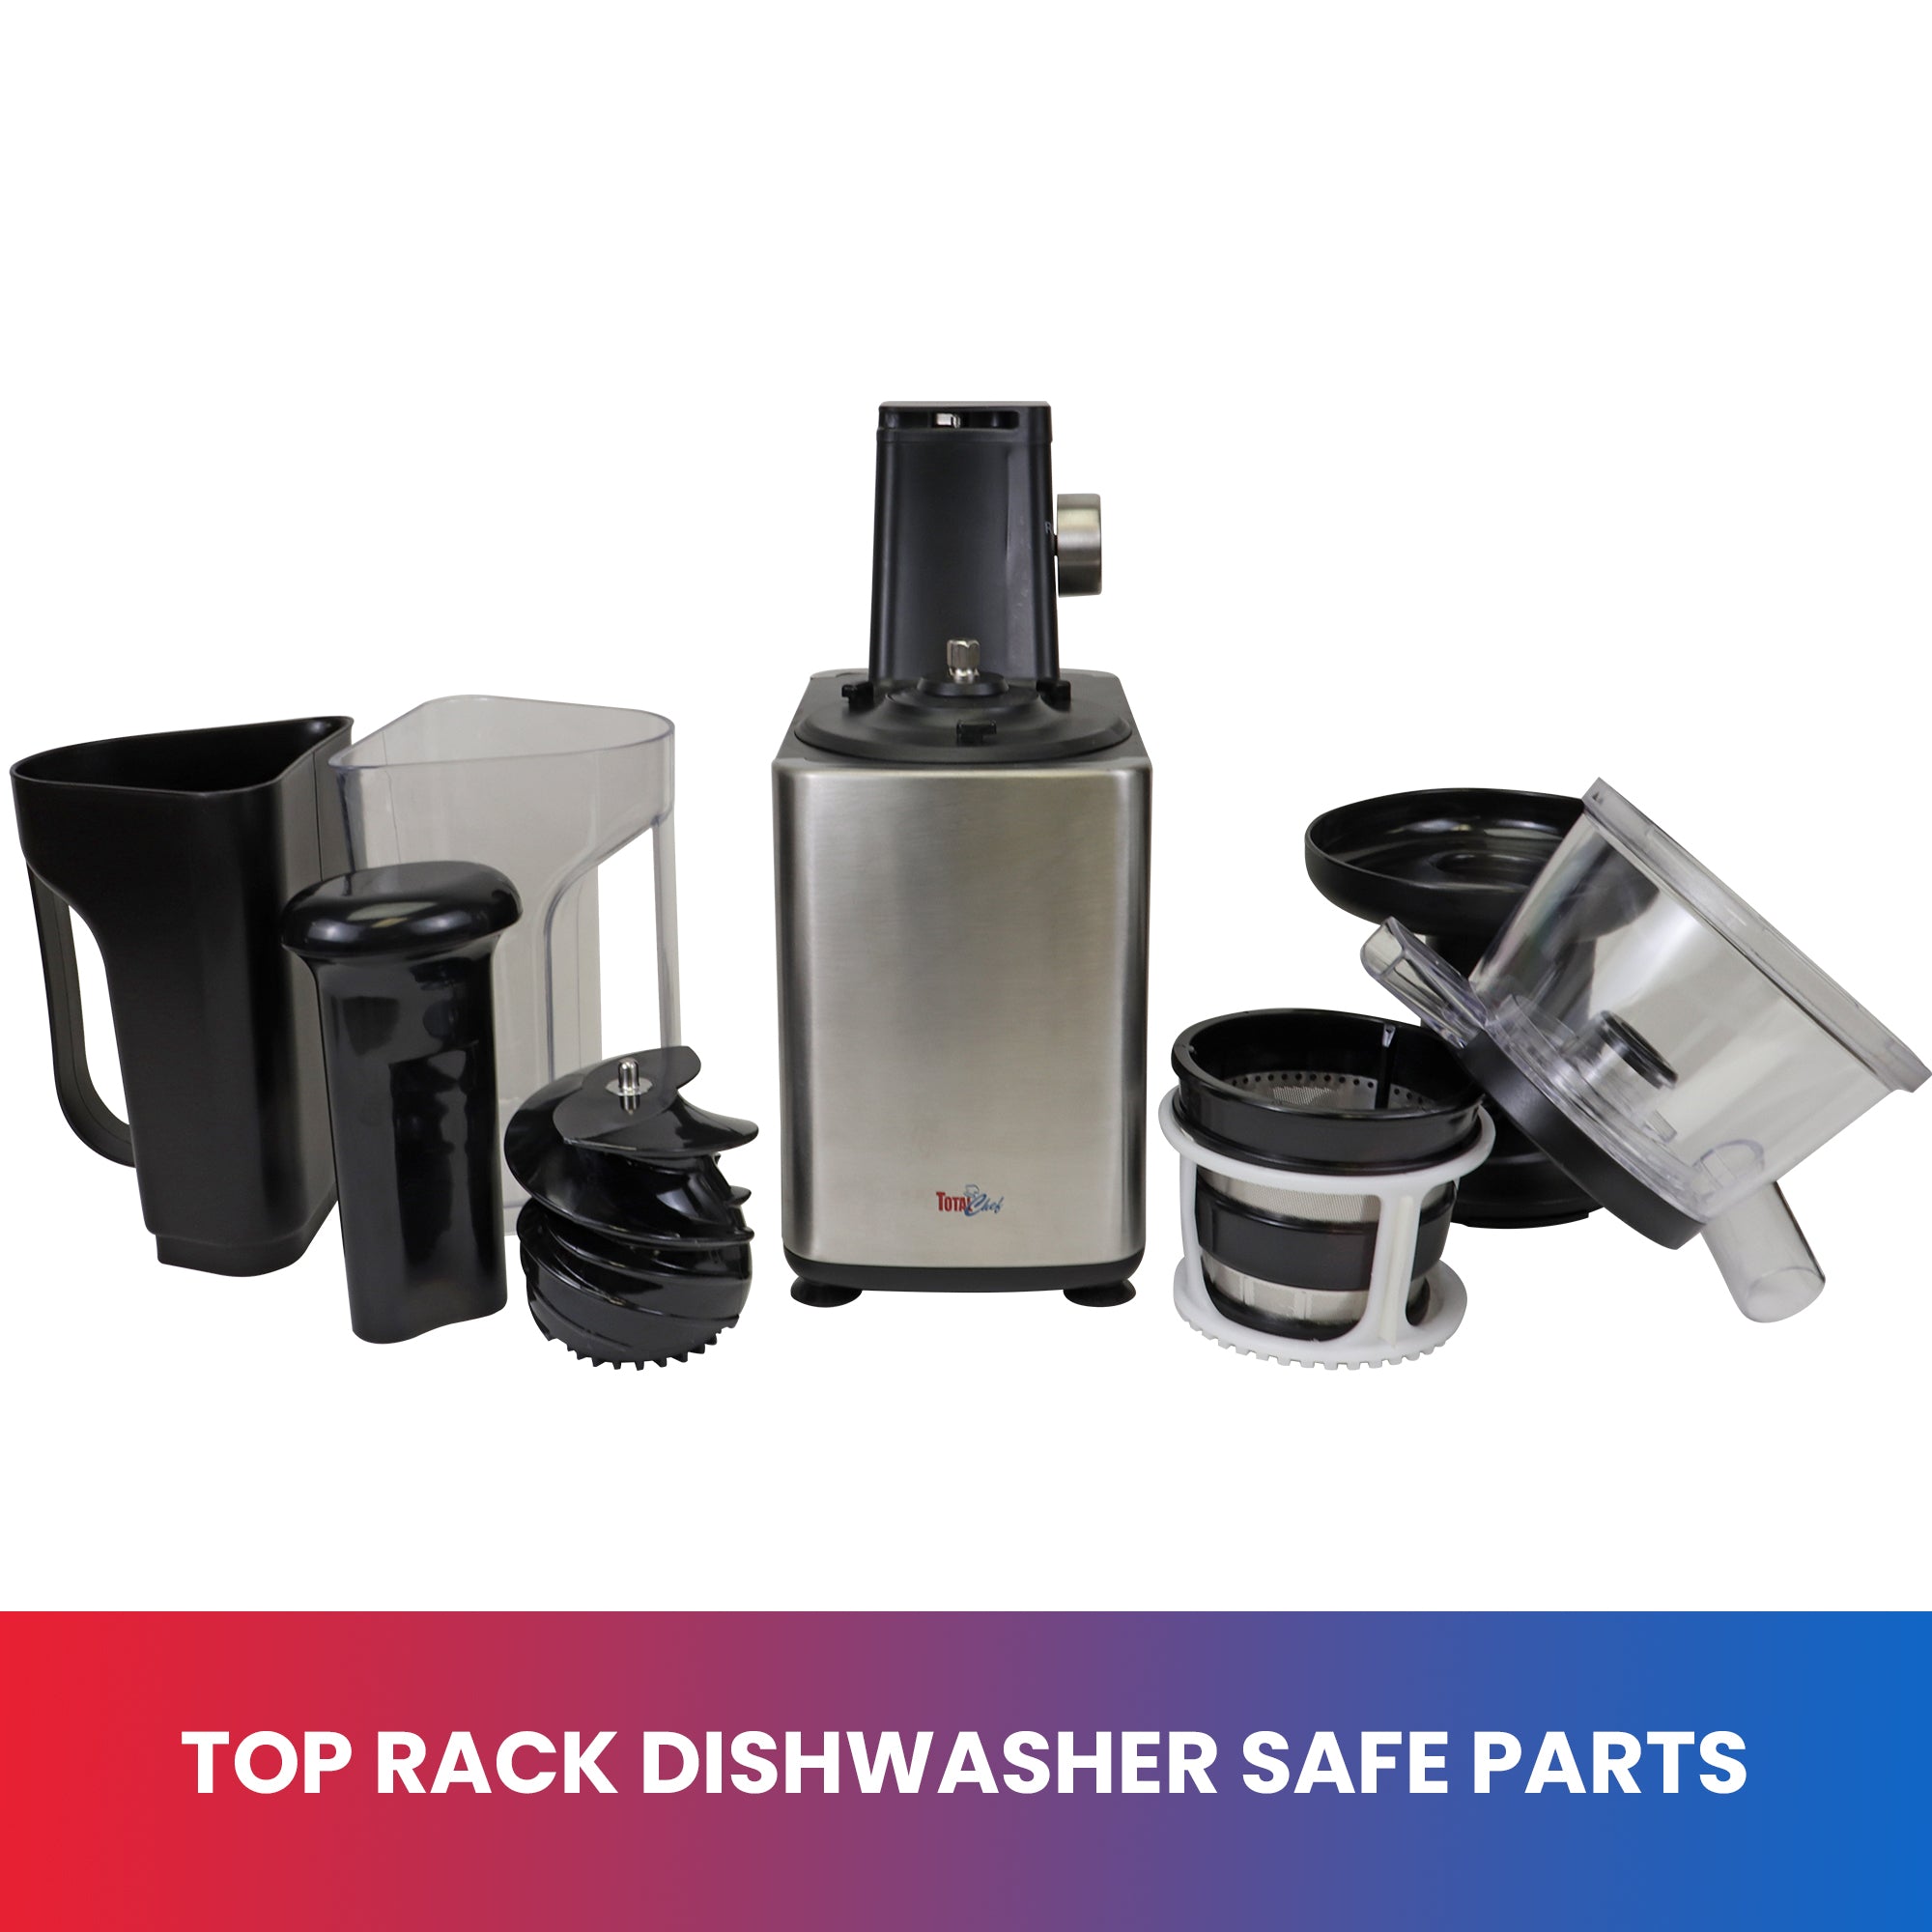 Product shot of all slow juicer parts with text below reading "Top rack dishwasher safe parts"